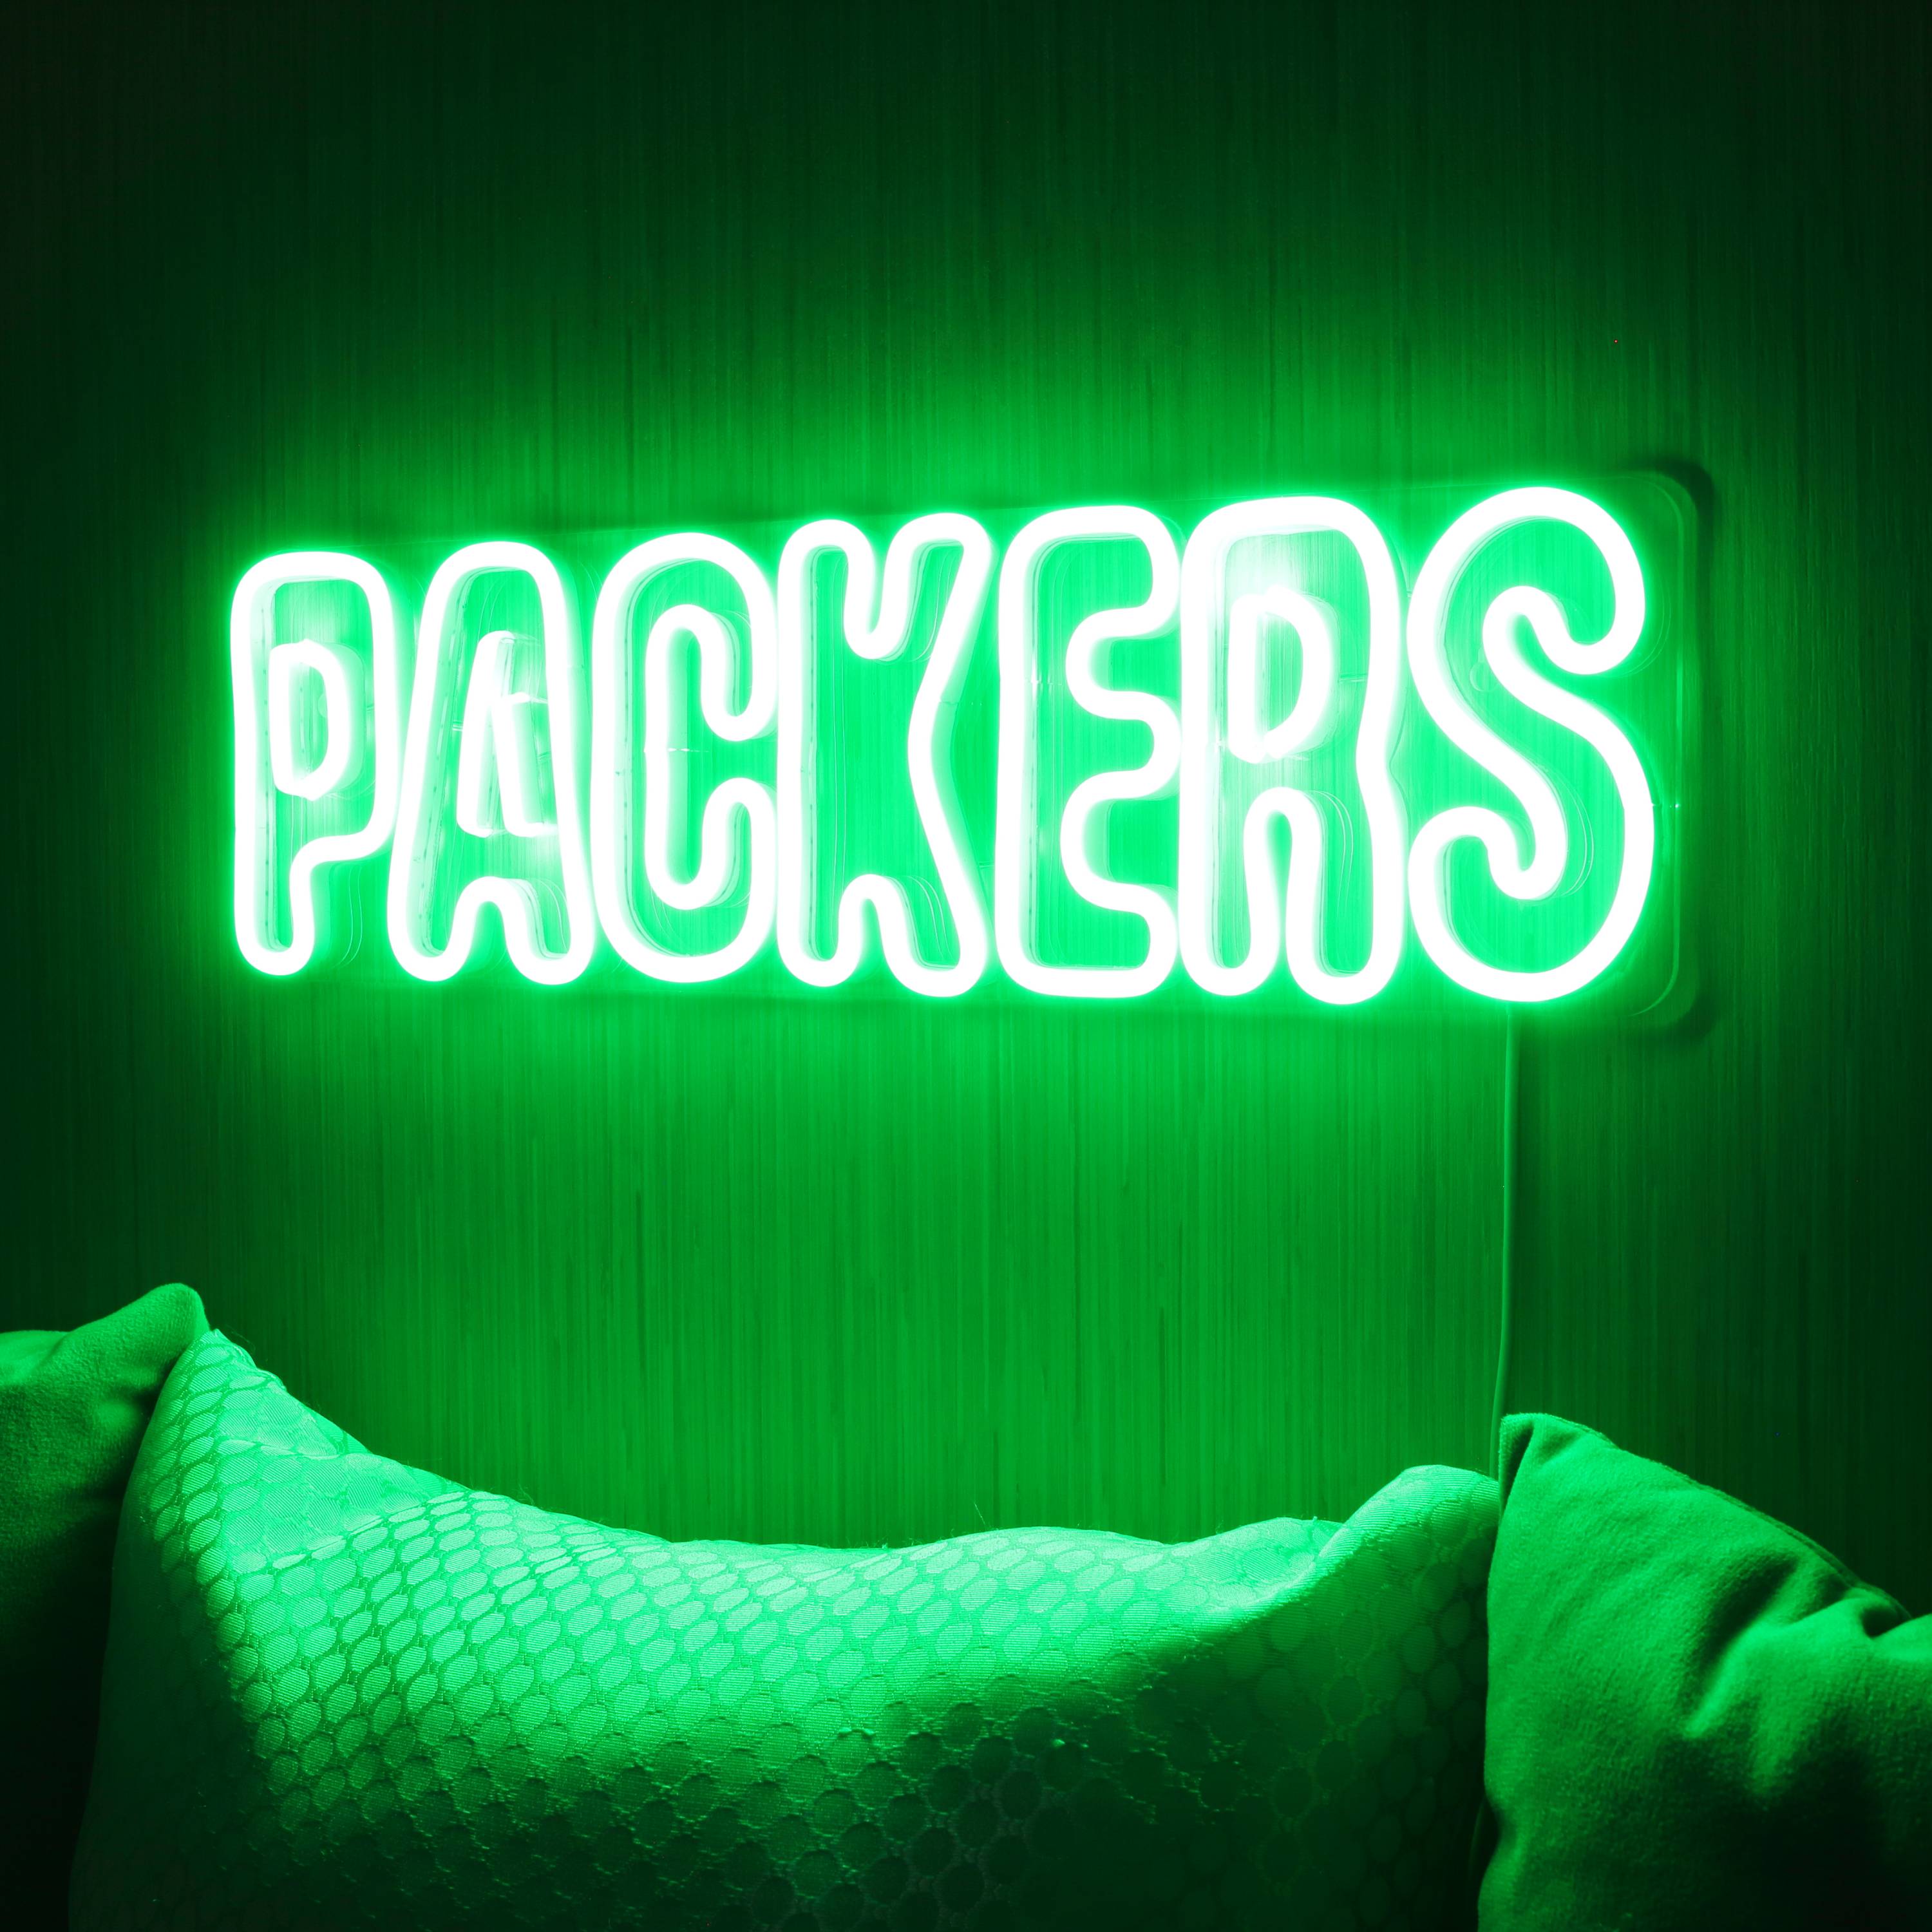 NFL PACKERS Large Flex Neon LED Sign